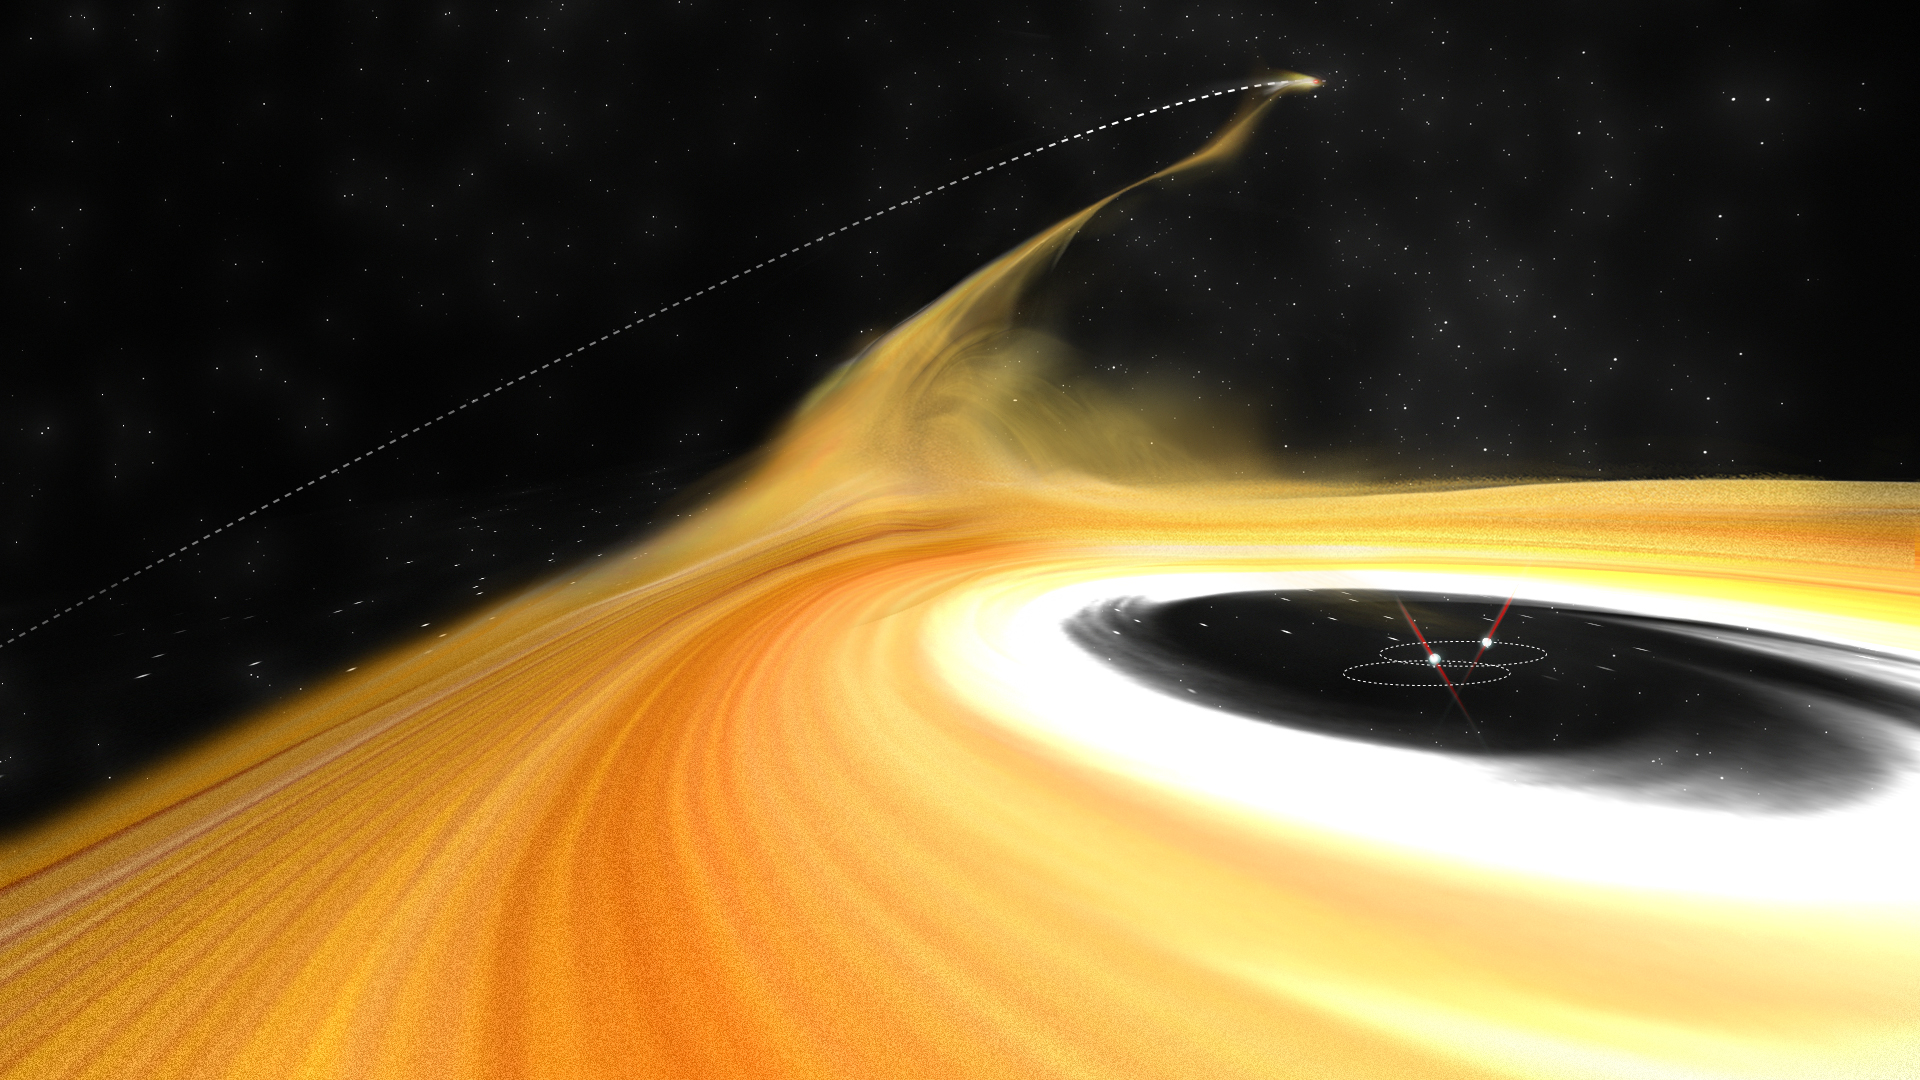 Scientists have captured an intruder object disrupting the protoplanetary disk—birthplace of planets—in Z Canis Majors (Z CMa), a star in the Canis Majoris constellation. This artist’s impression shows the perturber leaving the star system, pulling a long stream of gas from the protoplanetary disk along with it. Observational data from the Subaru Telescope, Karl G. Jansky Very Large Array, and Atacama Large Millimeter/submillimeter Array suggest the intruder object was responsible for the creati on of these gaseous streams, and its “visit” may have other as yet unknown impacts on the growth and development of planets in the star system. Credit: ALMA (ESO/NAOJ/NRAO), B. Saxton (NRAO/AUI/NSF)